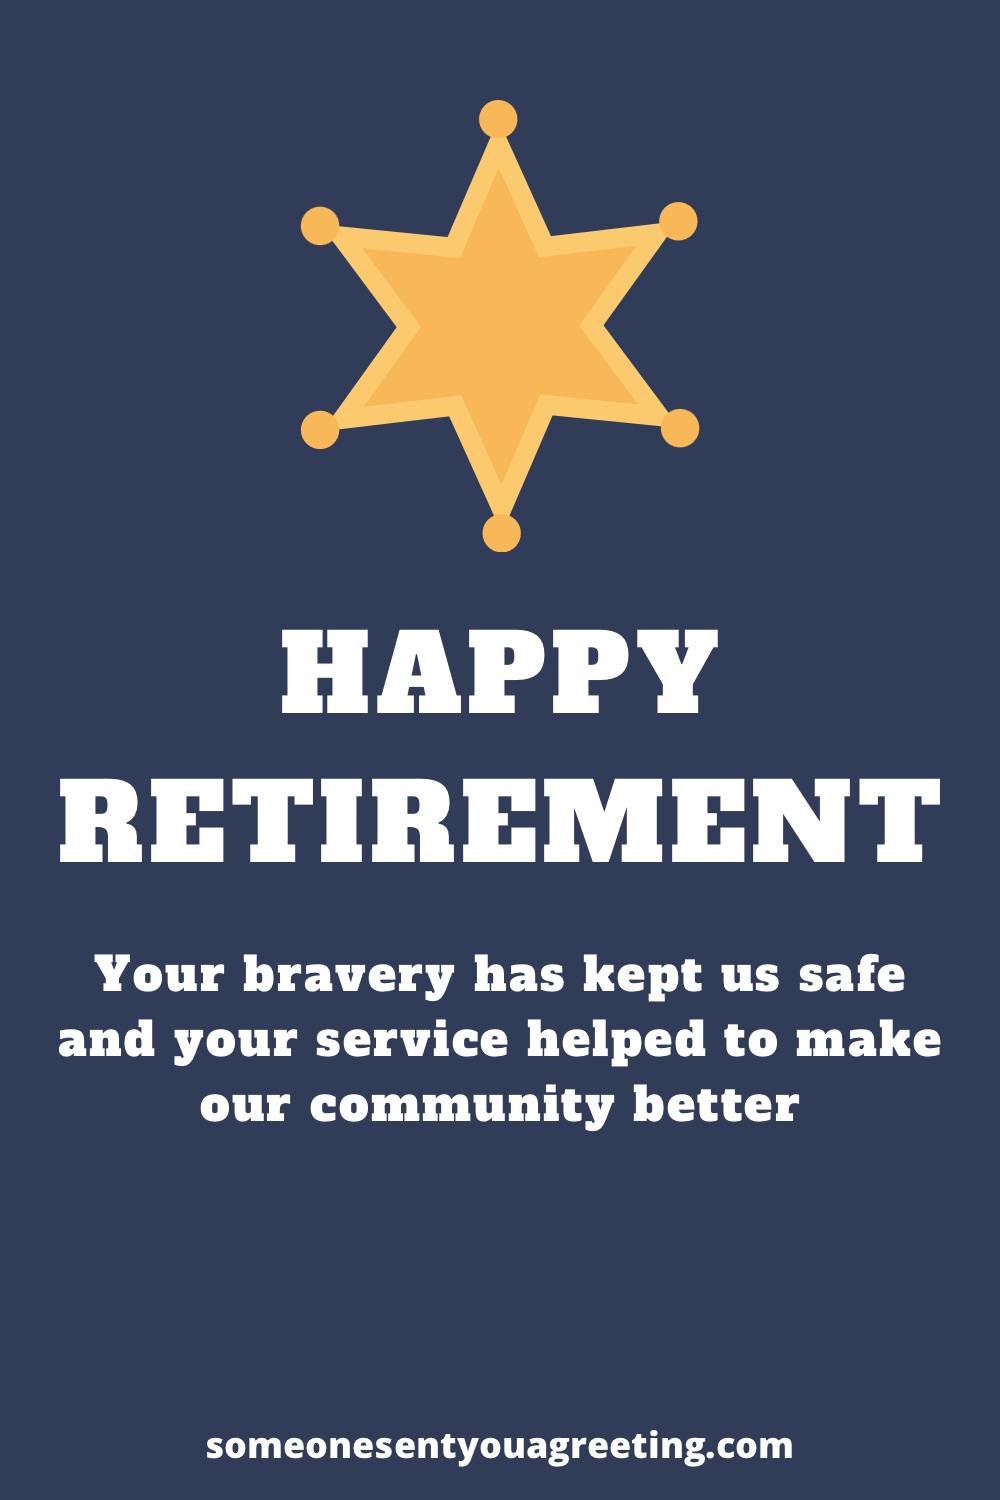 Happy retirement police officer